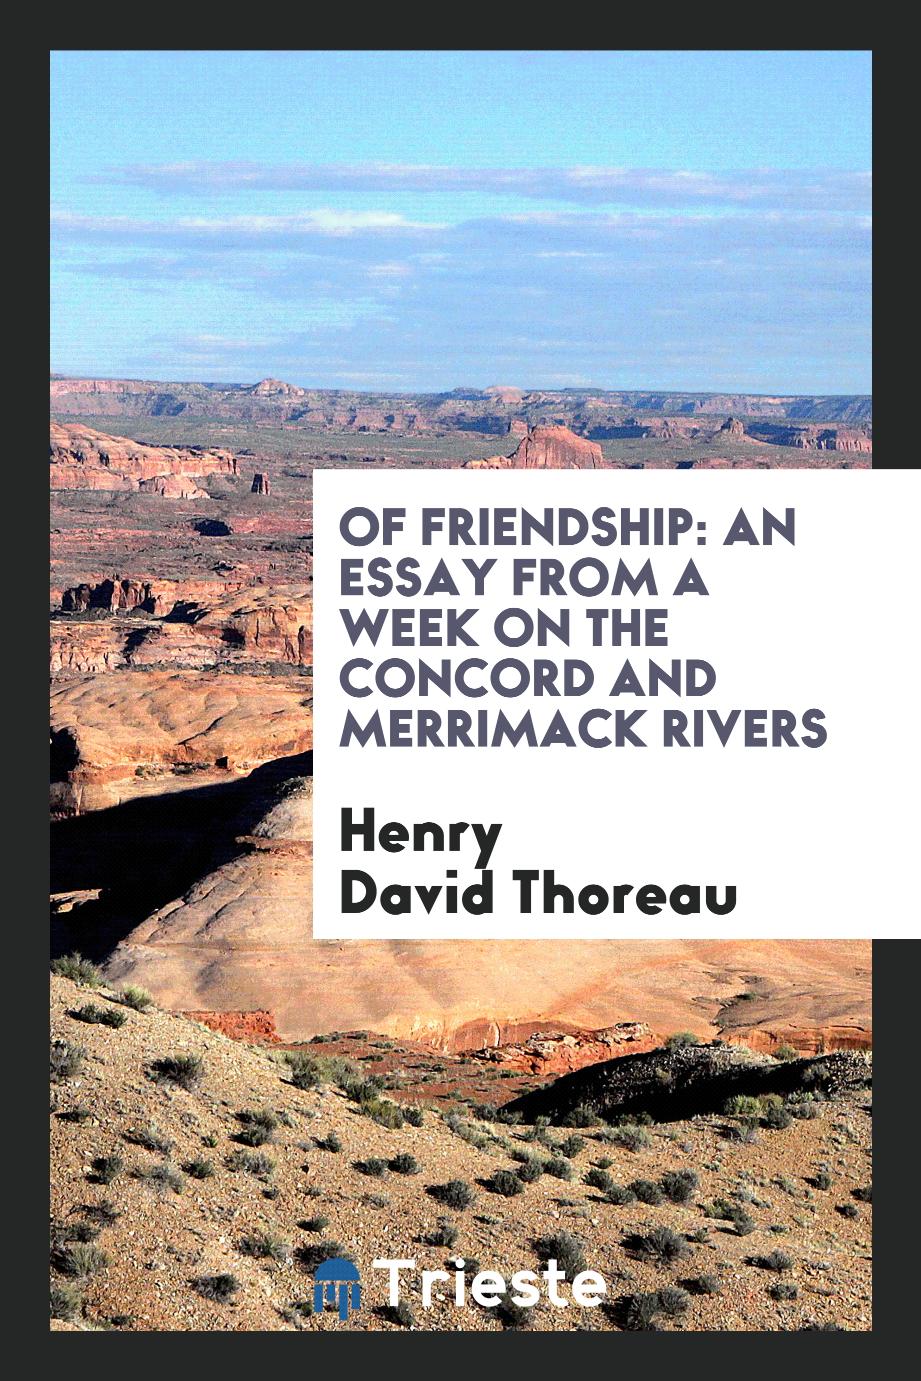 Of Friendship: An Essay from a Week on the Concord and Merrimack Rivers